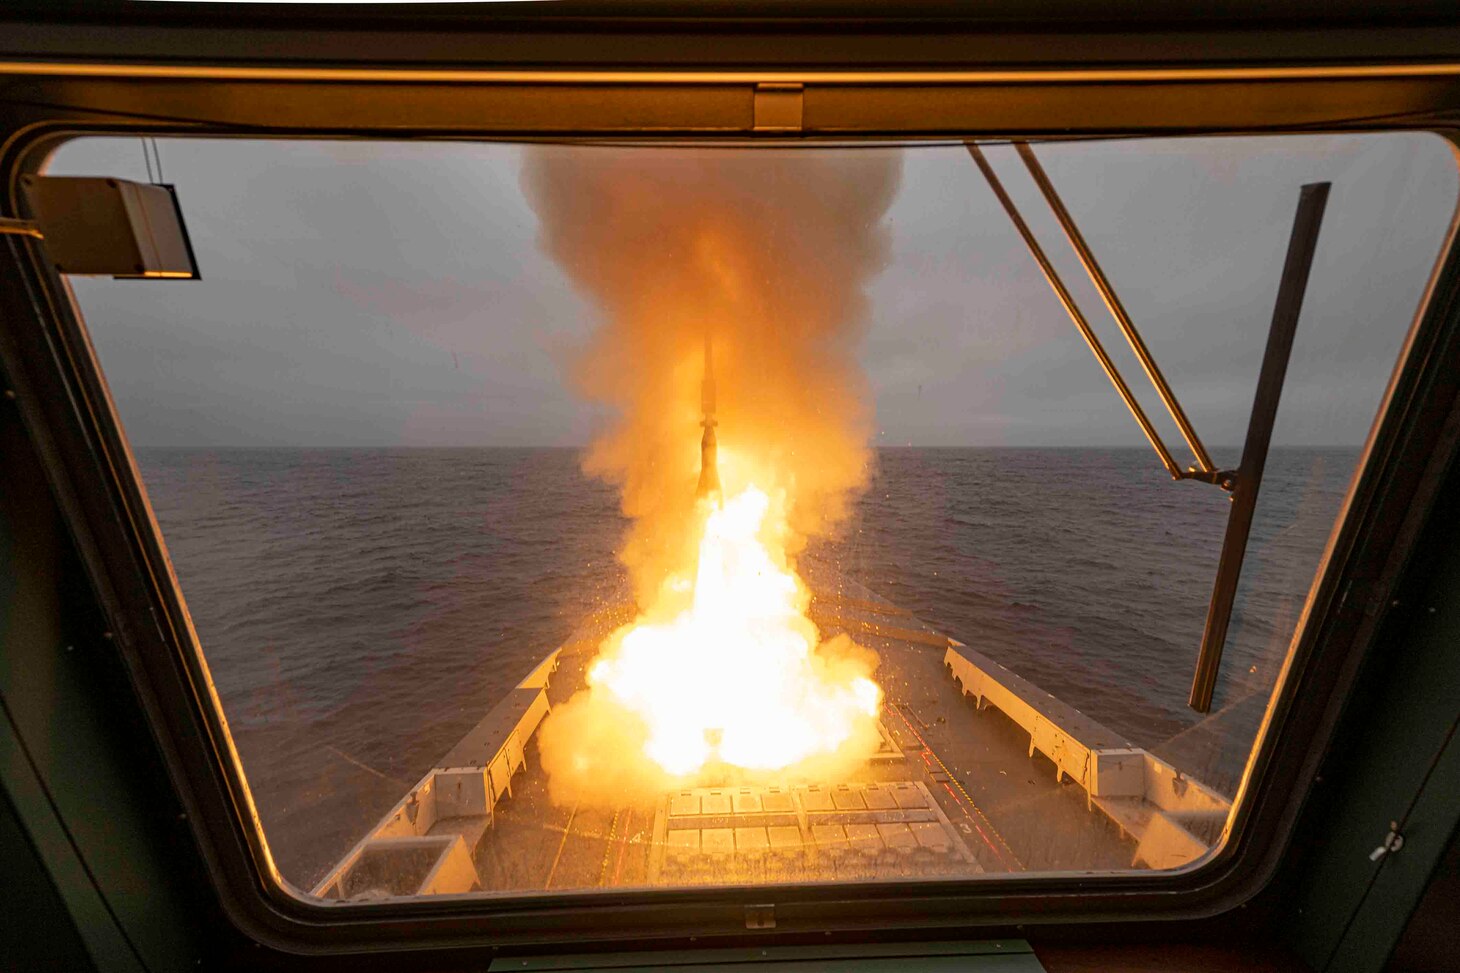 In the image, the firing of the ASTER 30 missile from the FREMM Bretagne.
Combined missile defense exercise Formidable Shield 2023 (FS 23) takes place in the North Atlantic off the coast of Scotland from May 8-26, 2023. Hosted by Commander US Navy 6th Fleet (C6F) and led by NATO (STRIKFORNATO – SFN). This training takes place within the framework of the Maritime Theater Missile Defense (MTMD1) forum.
Ten nations are taking part in the exercise. France is contributing to this by committing two first-class frigate this year: the air defense frigate (FDA) Chevalier Paul and the multi-mission frigate (FREMM) Bretagne. (French Navy courtesy photo)